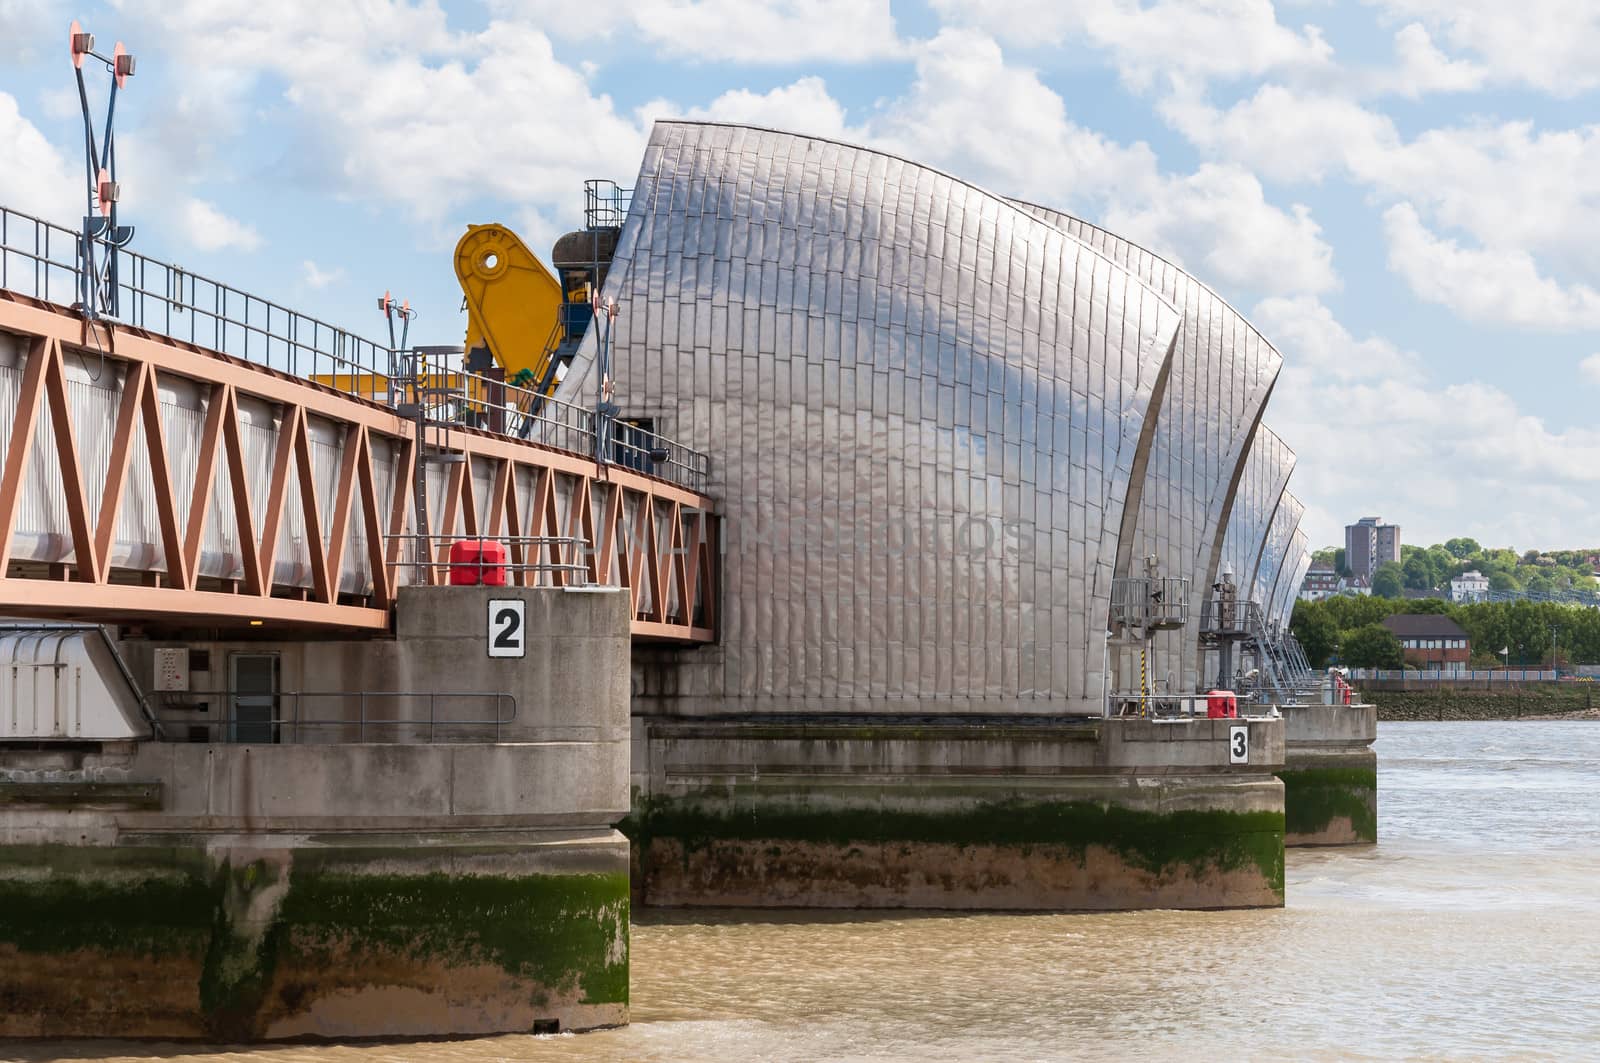 The Thames Barrier - close up of movable flood barrier in eastern London, United Kingdom